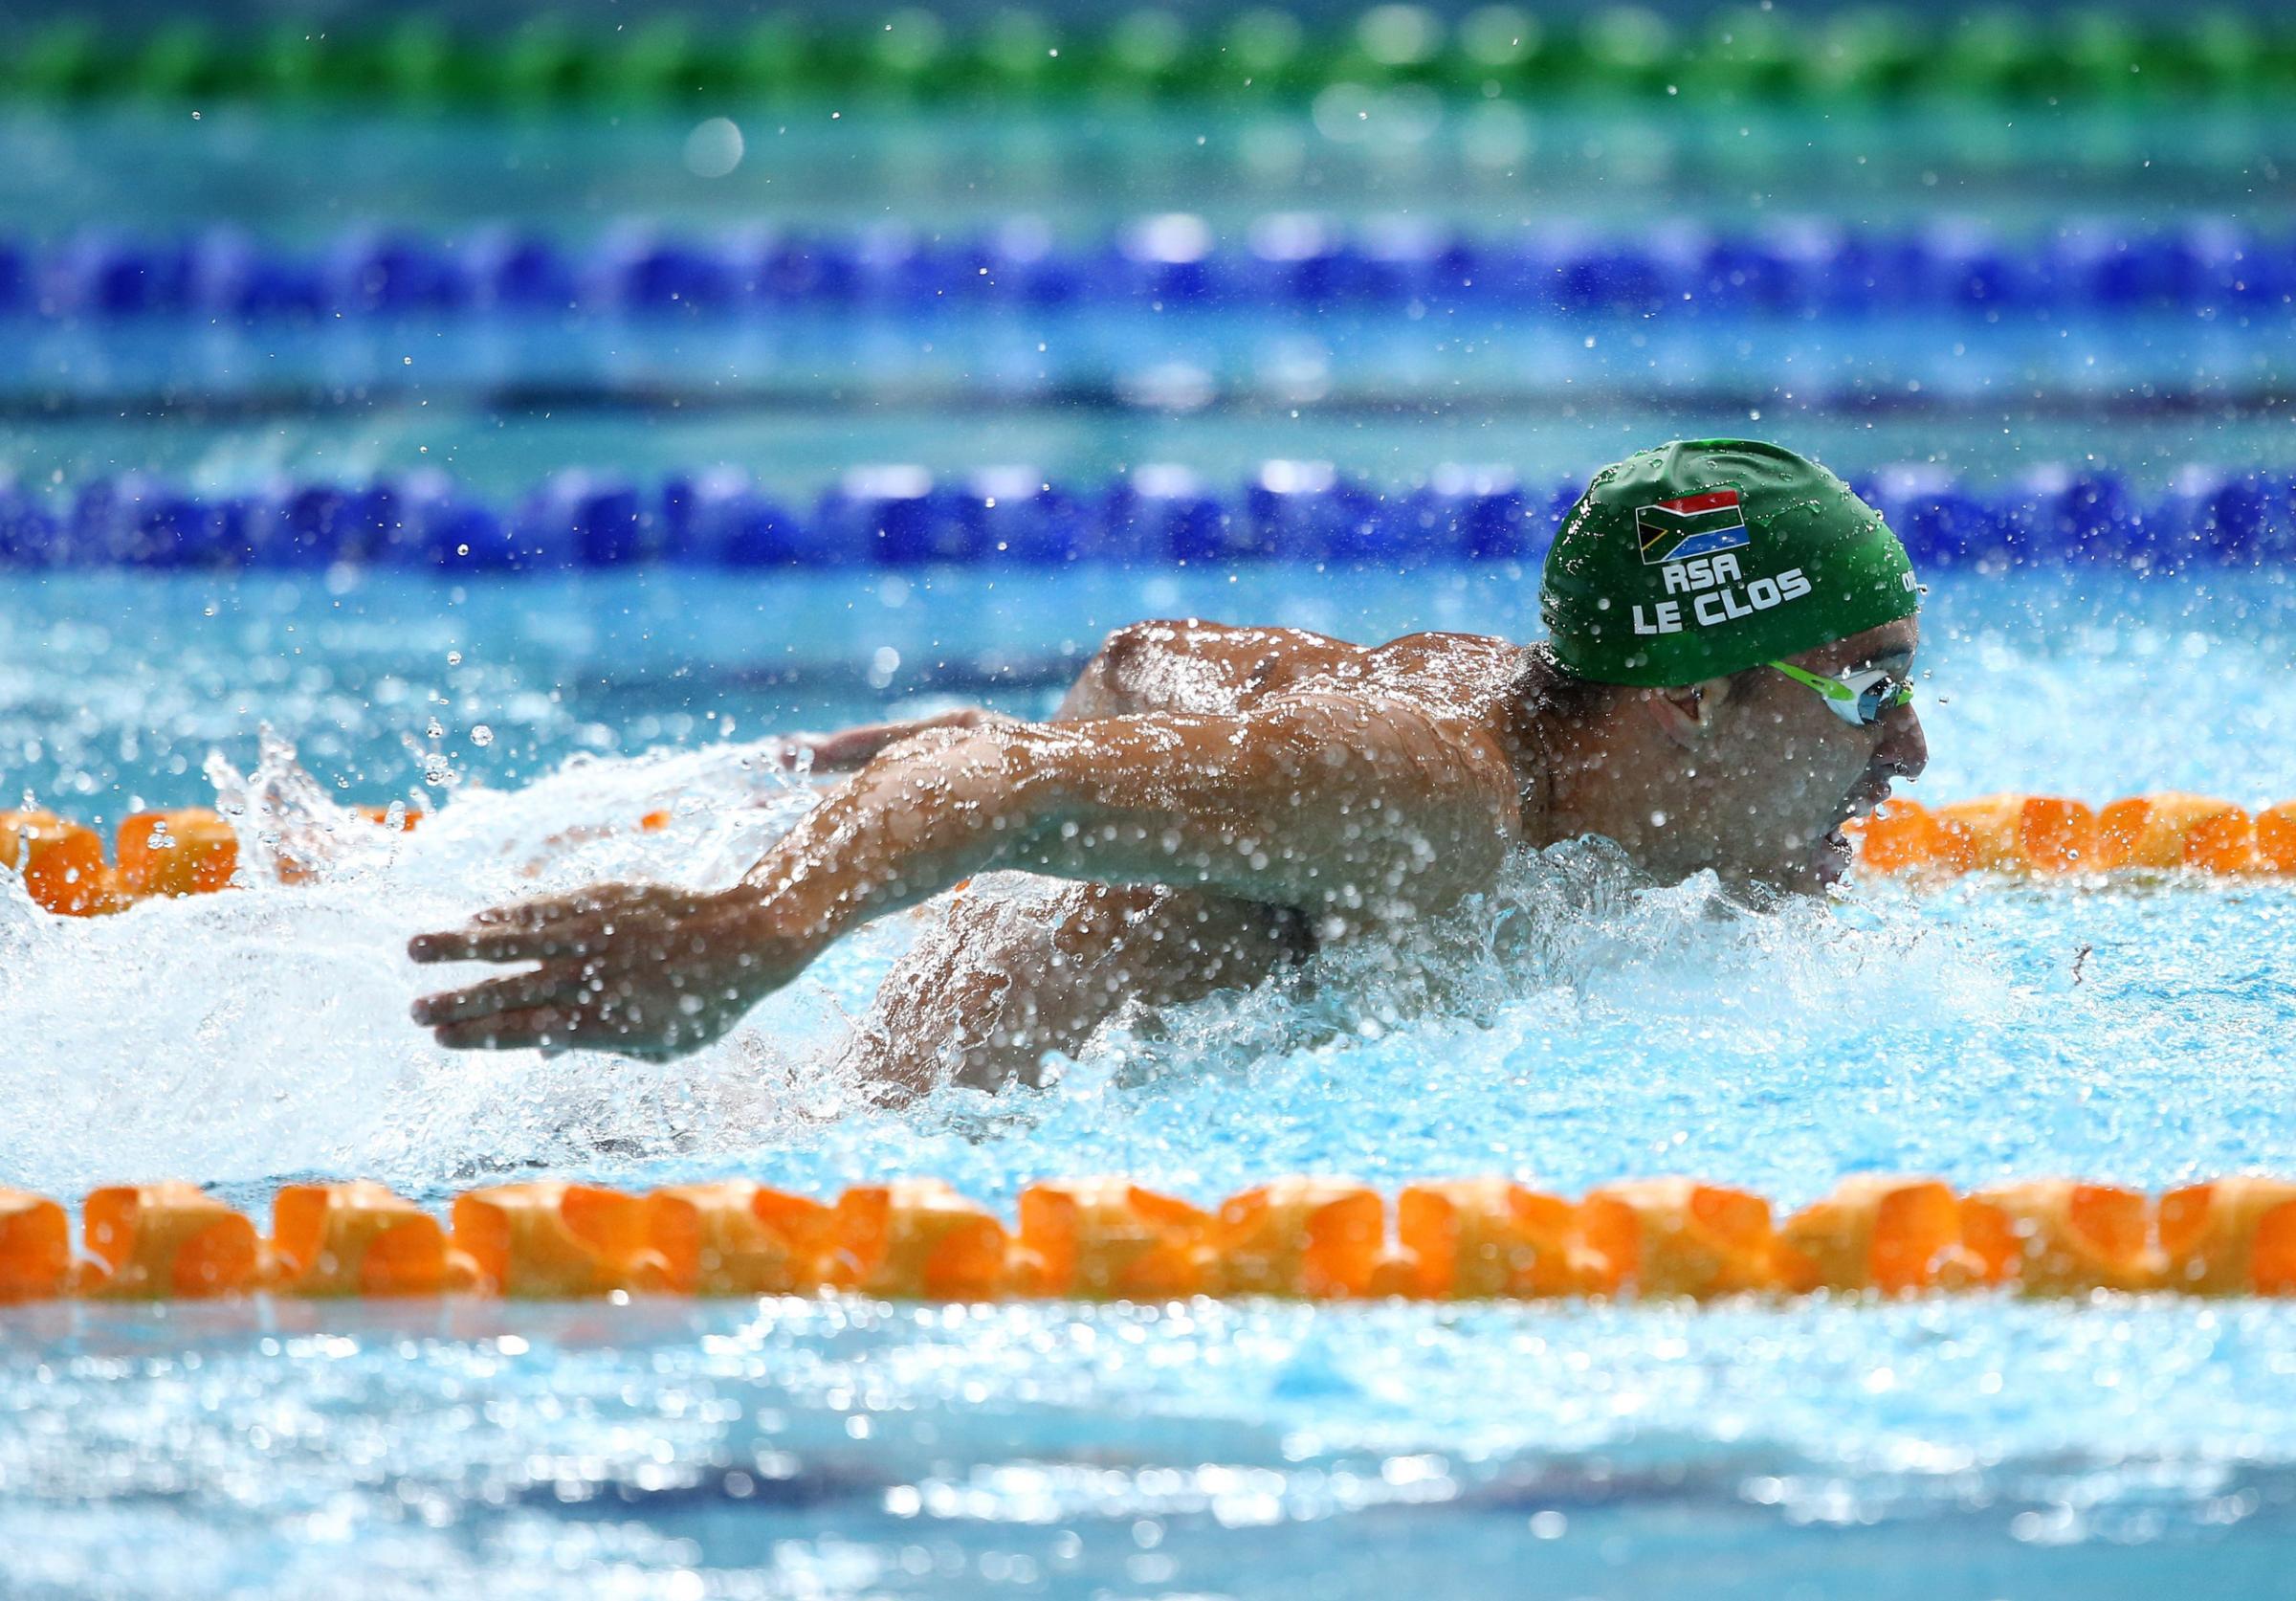 Chad le Clos—He snatched gold from Michael Phelps in the 200-m butterfly in 2012 and is hoping to defend it against his archrival.